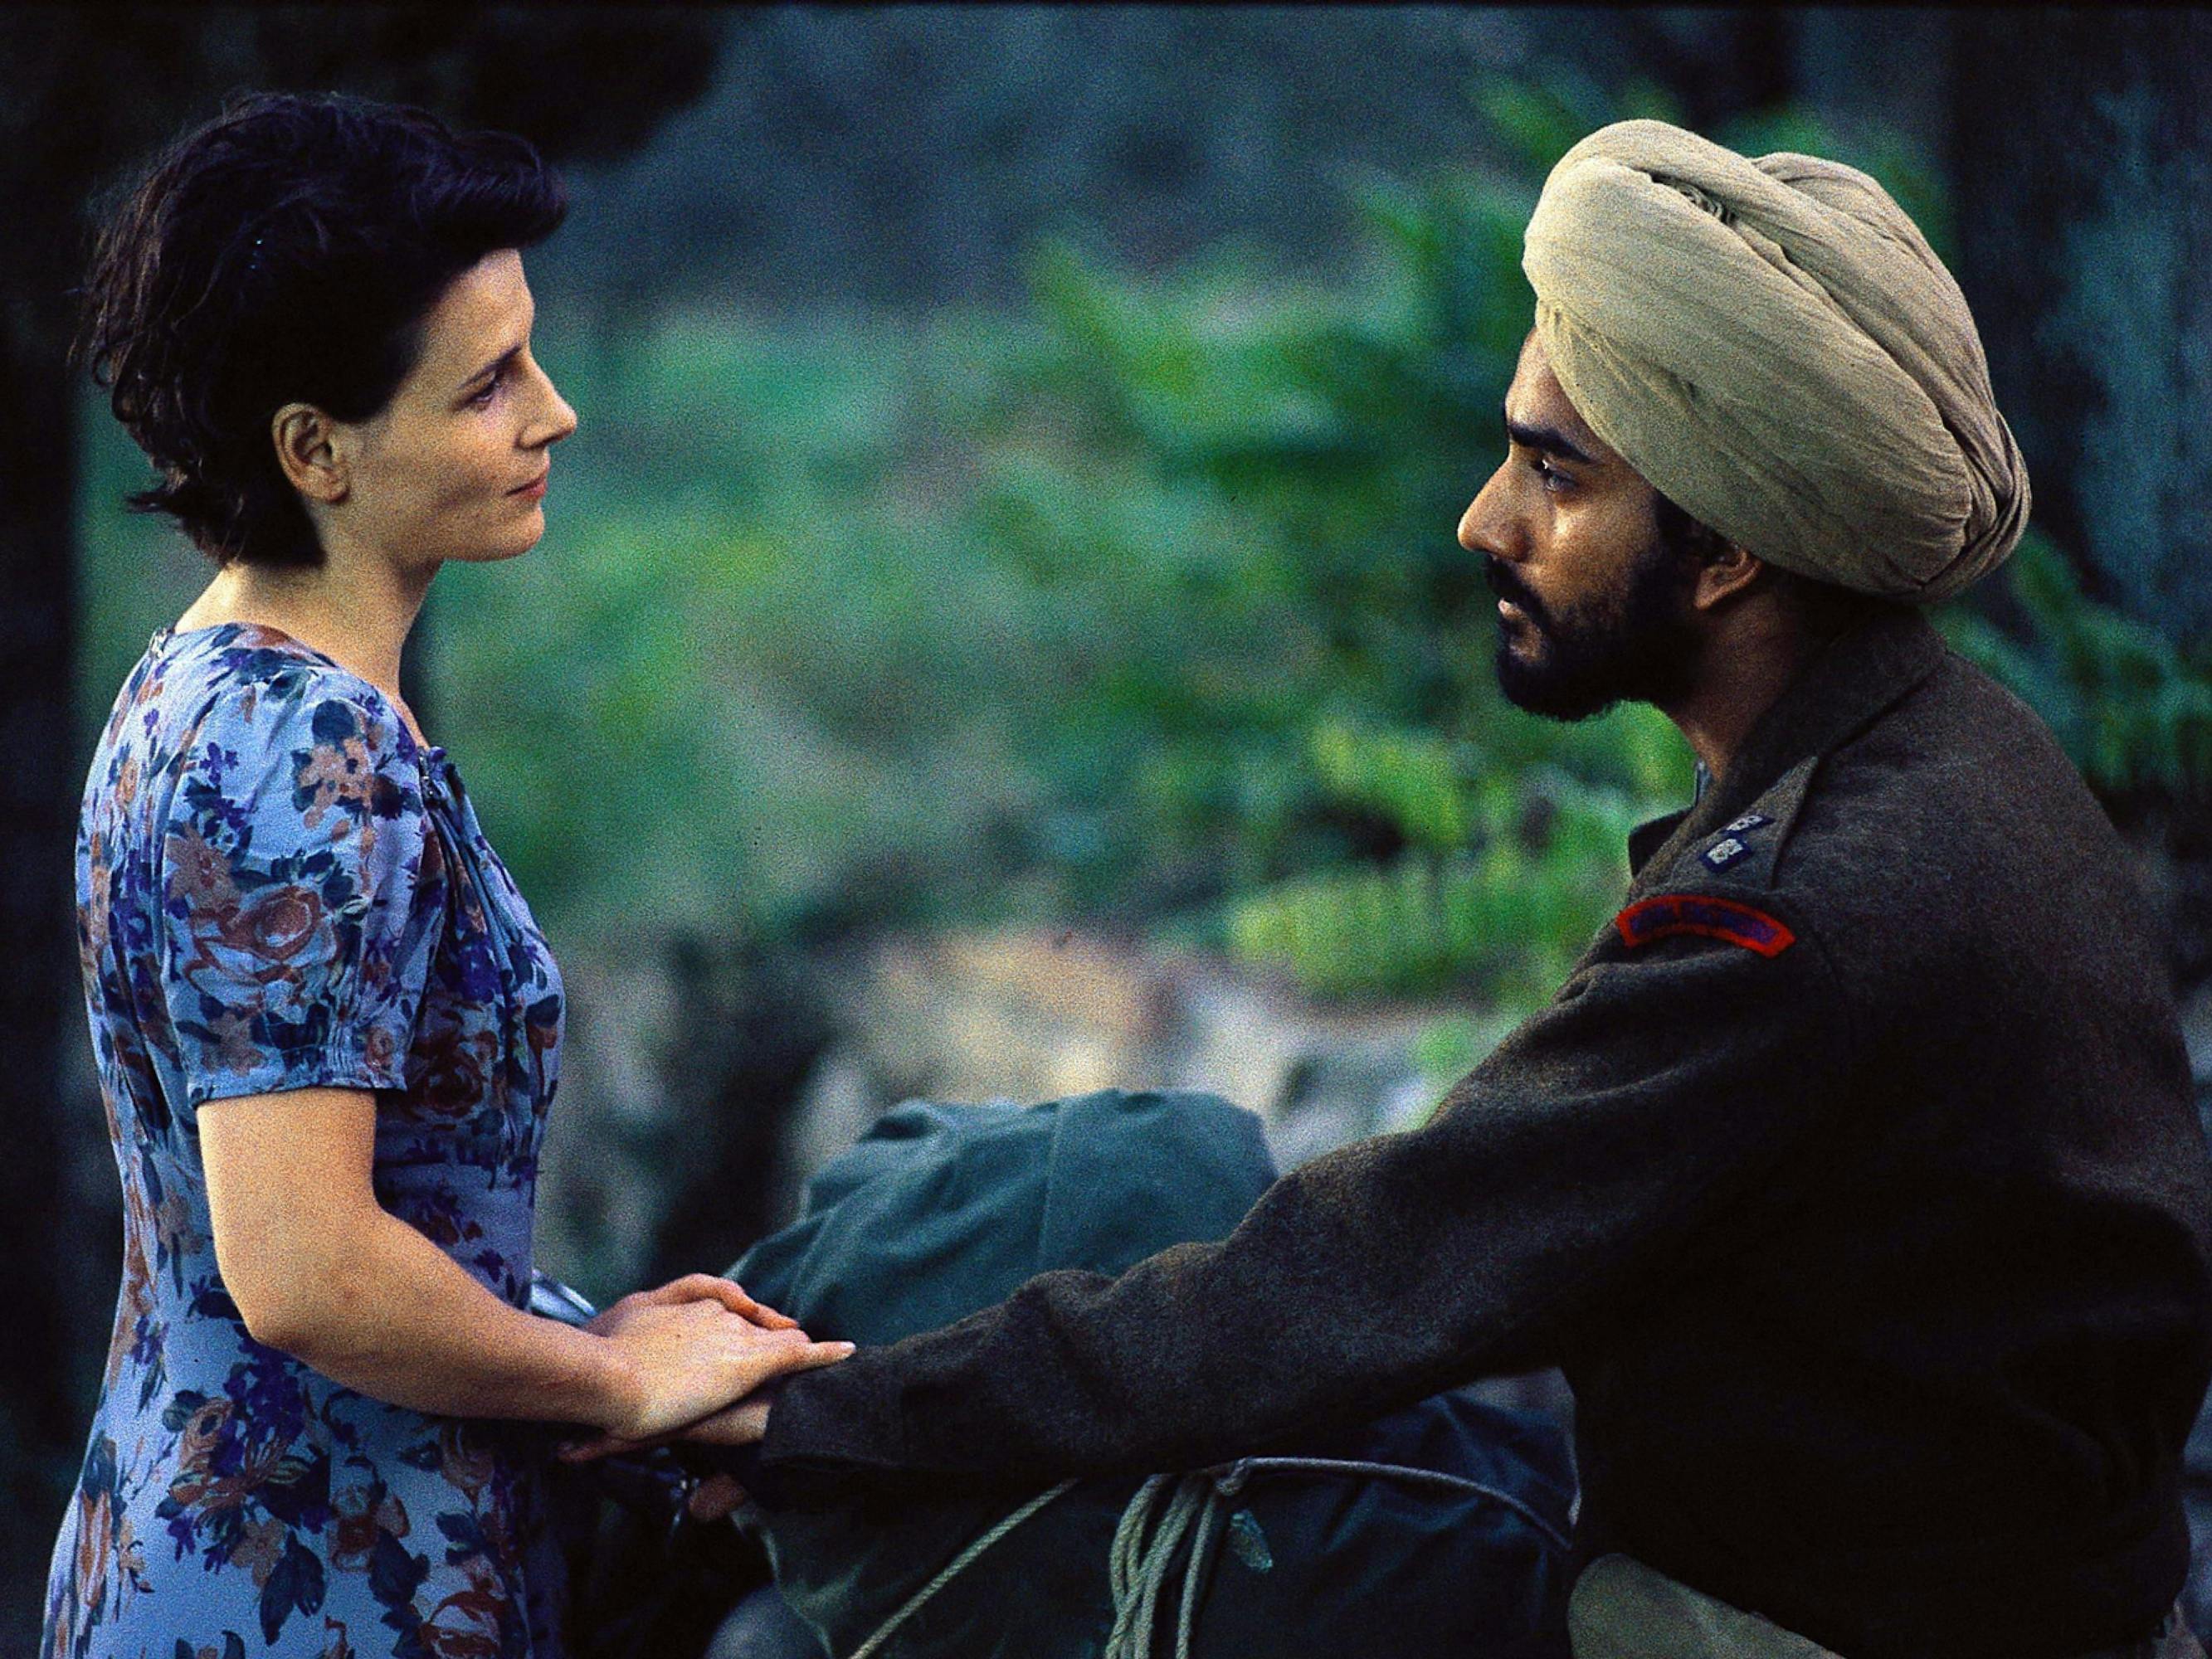 Juliette Bincohe holds the hand of Naveen Andrews in The English Patient. She wears a blue floral dress; he is in a dark jacket with red trimmed lapels and wears a beige turban. They look at each other fondly. 